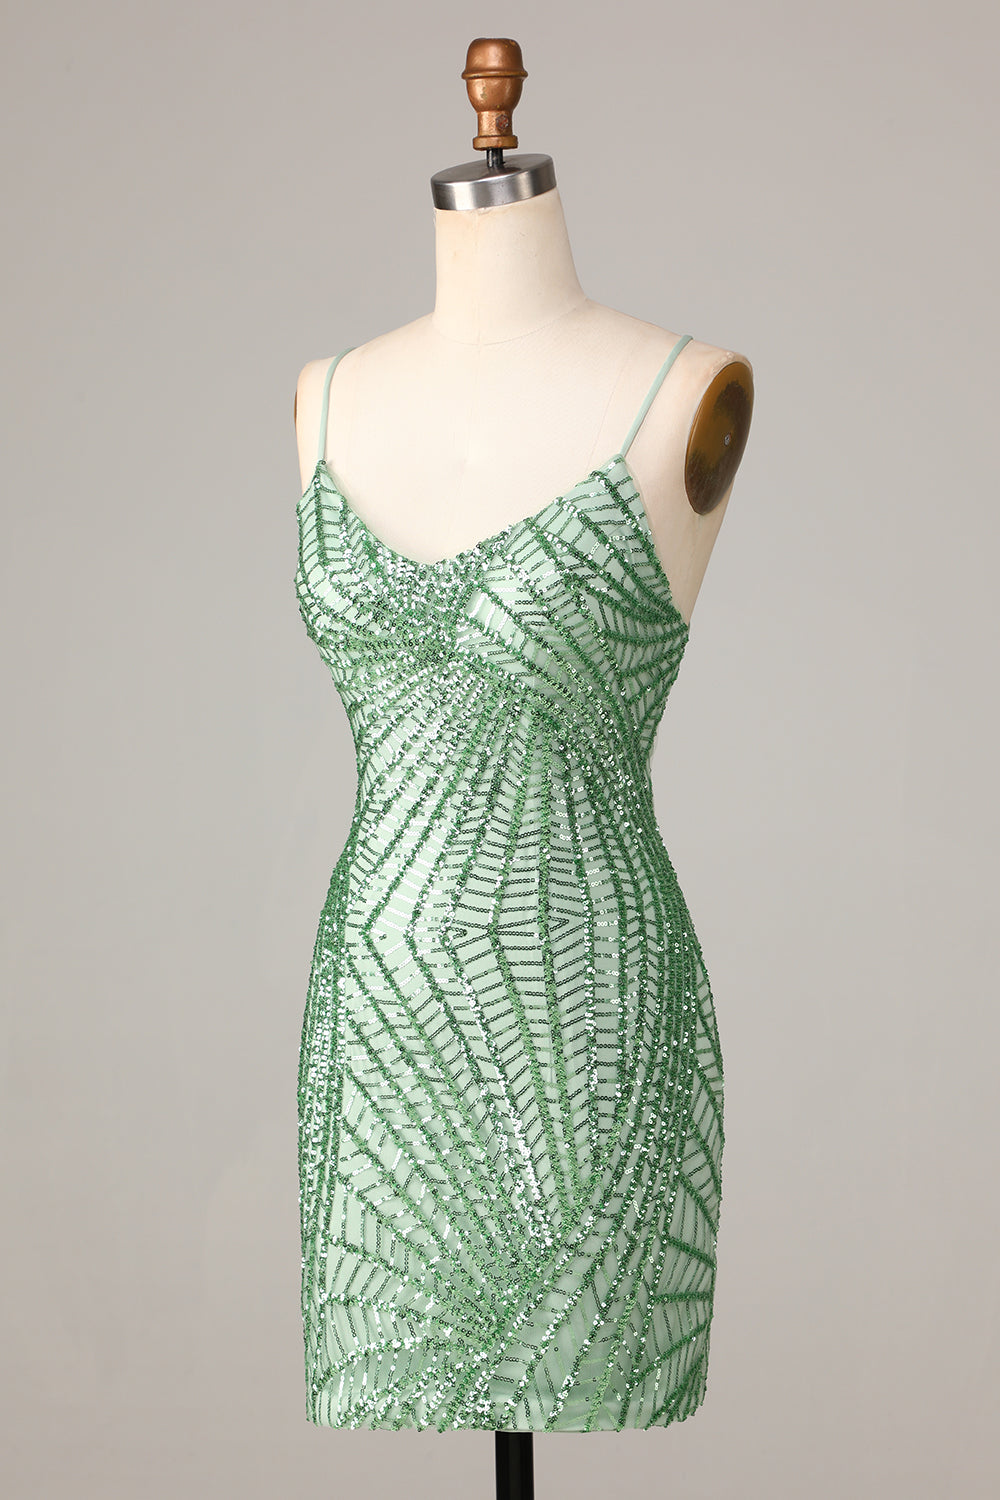 Sparkly Bodycon Spaghetti Straps Green Sequins Short Homecoming Dress